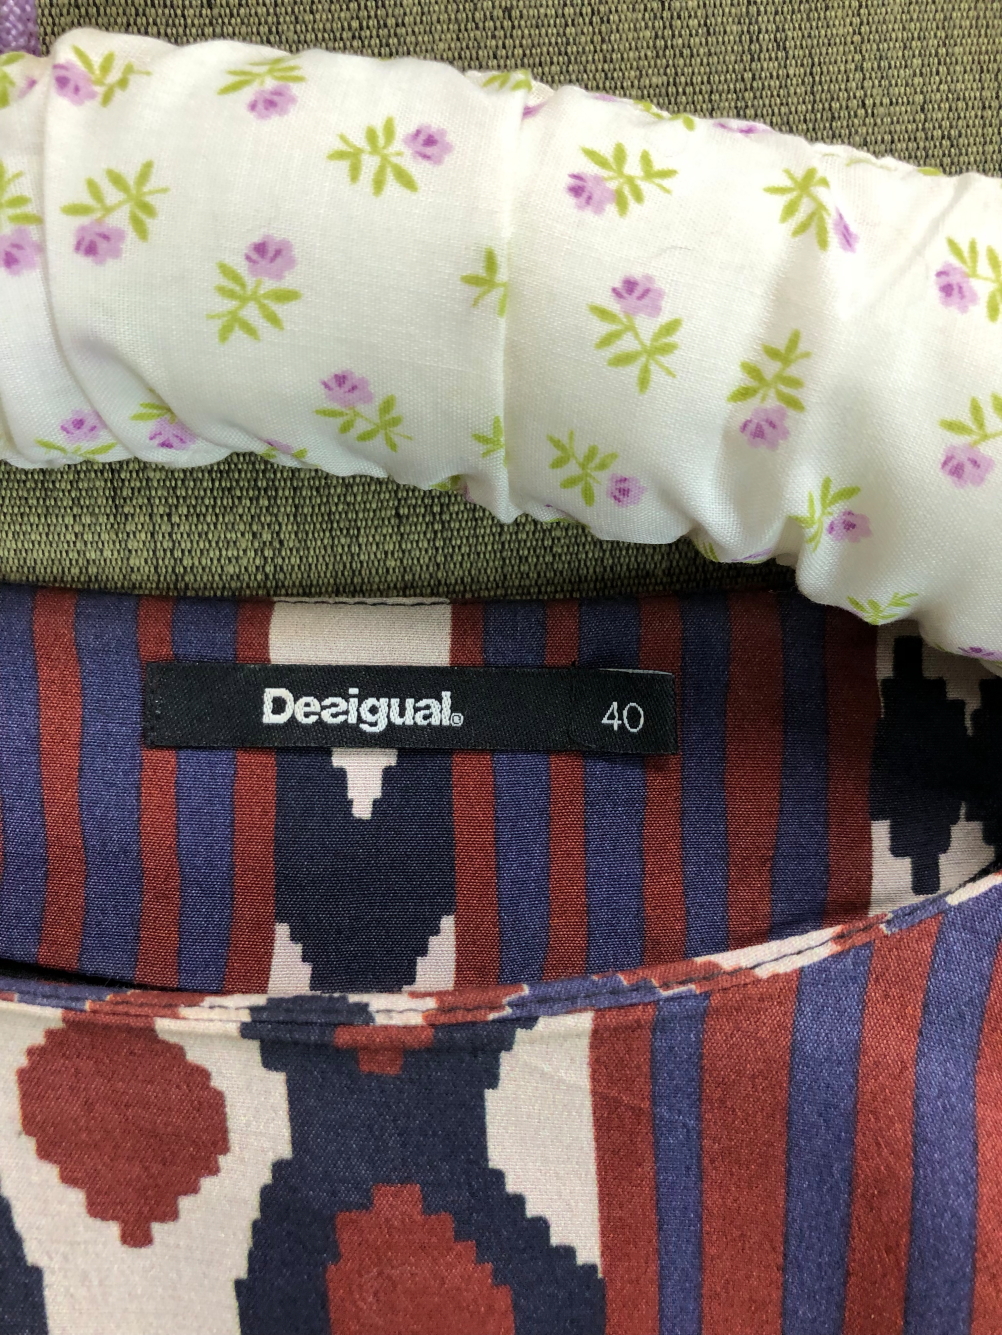 A DESIGUAL MULTI COLOURED MULTI PATTERNED MULTI PRINT COAT SIZE 42, TOGETHER WITH TWO TUNIC - Image 11 of 11